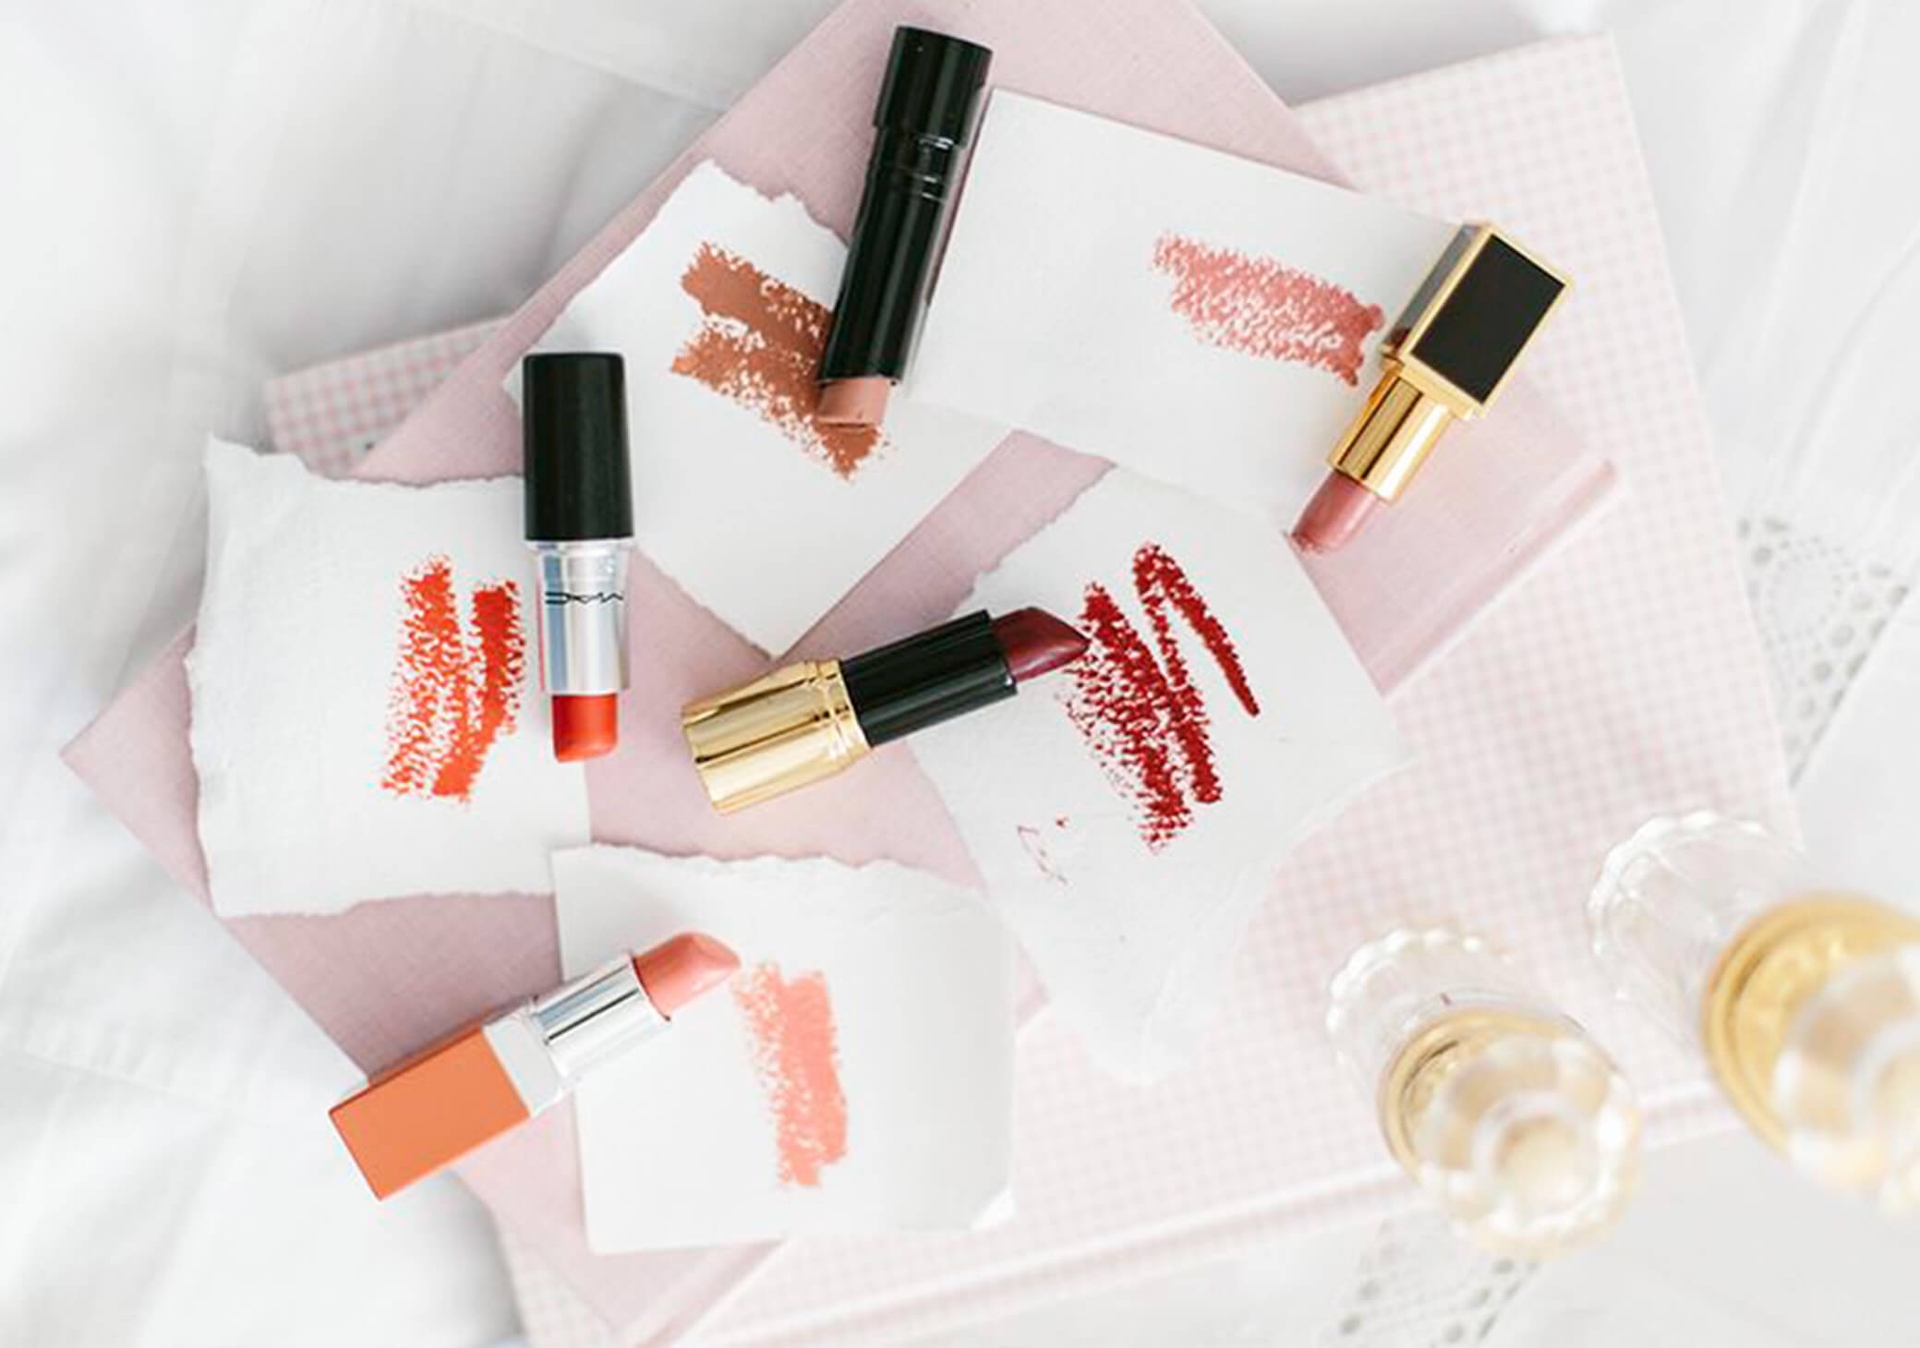 Find Out Your Best Trait Based on Your Favorite Makeup Product!